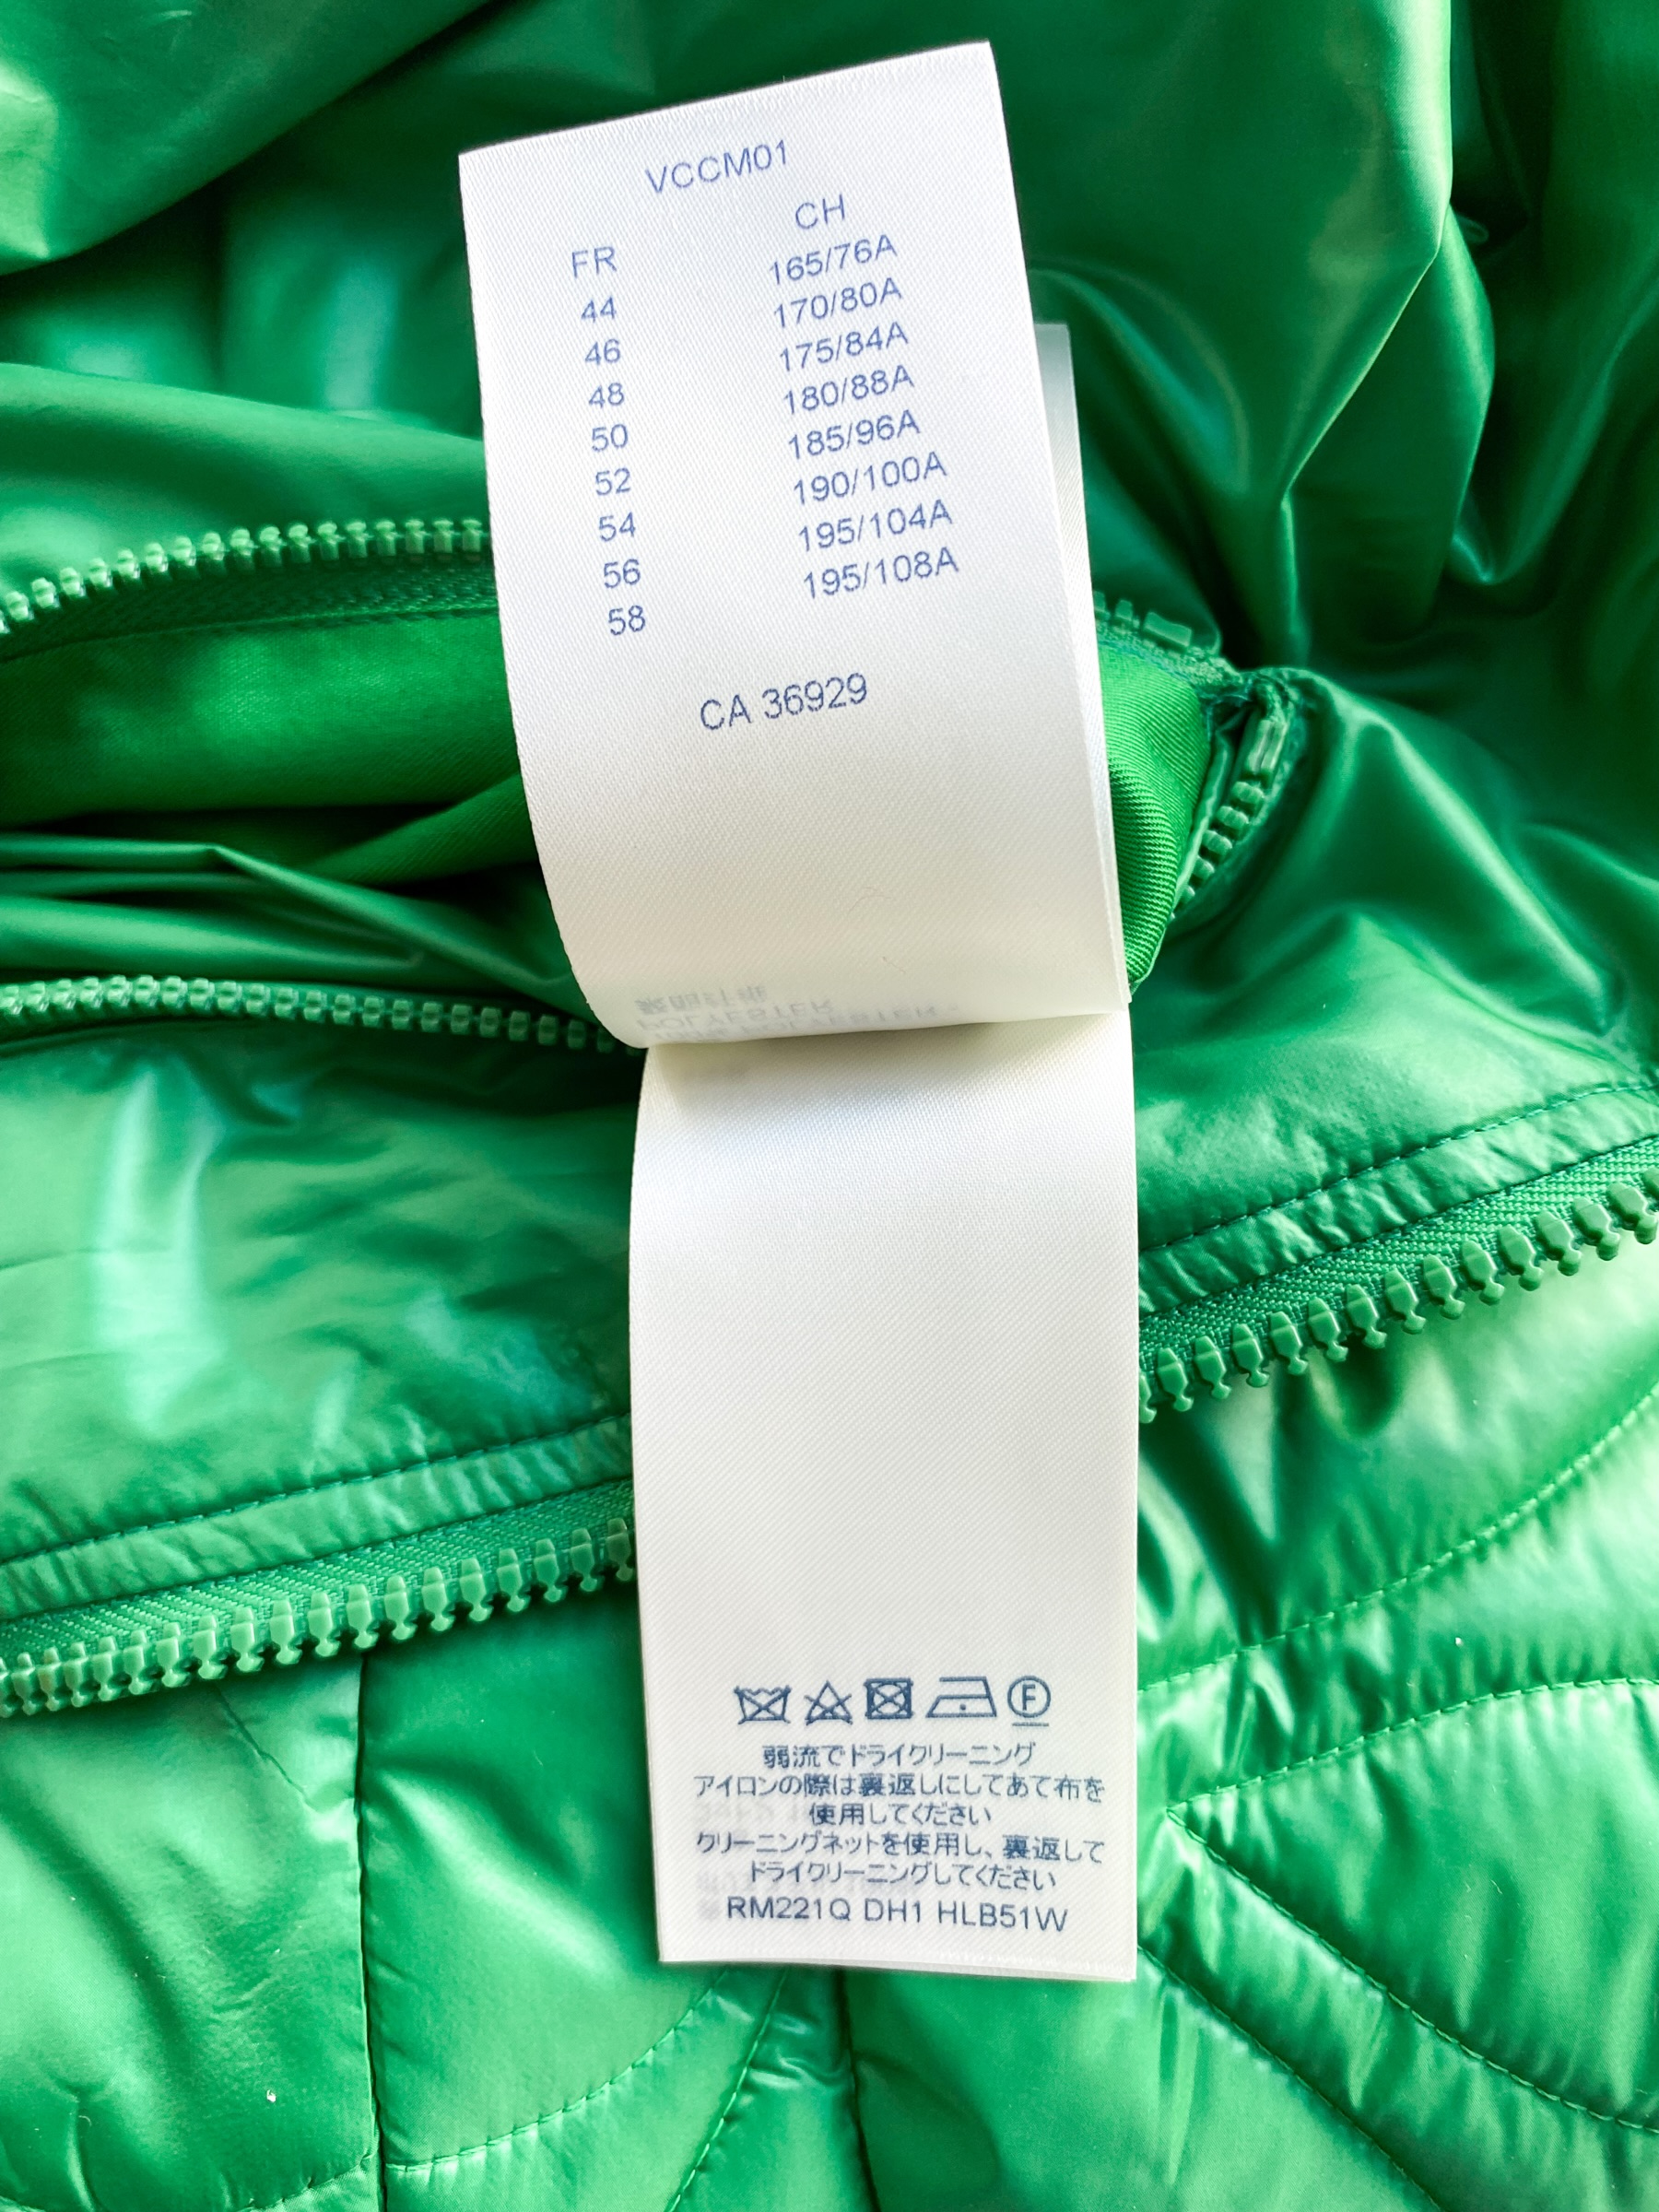 Louis Vuitton Monogram Mens Down Jackets, Green, 60*Stock Confirmation Required